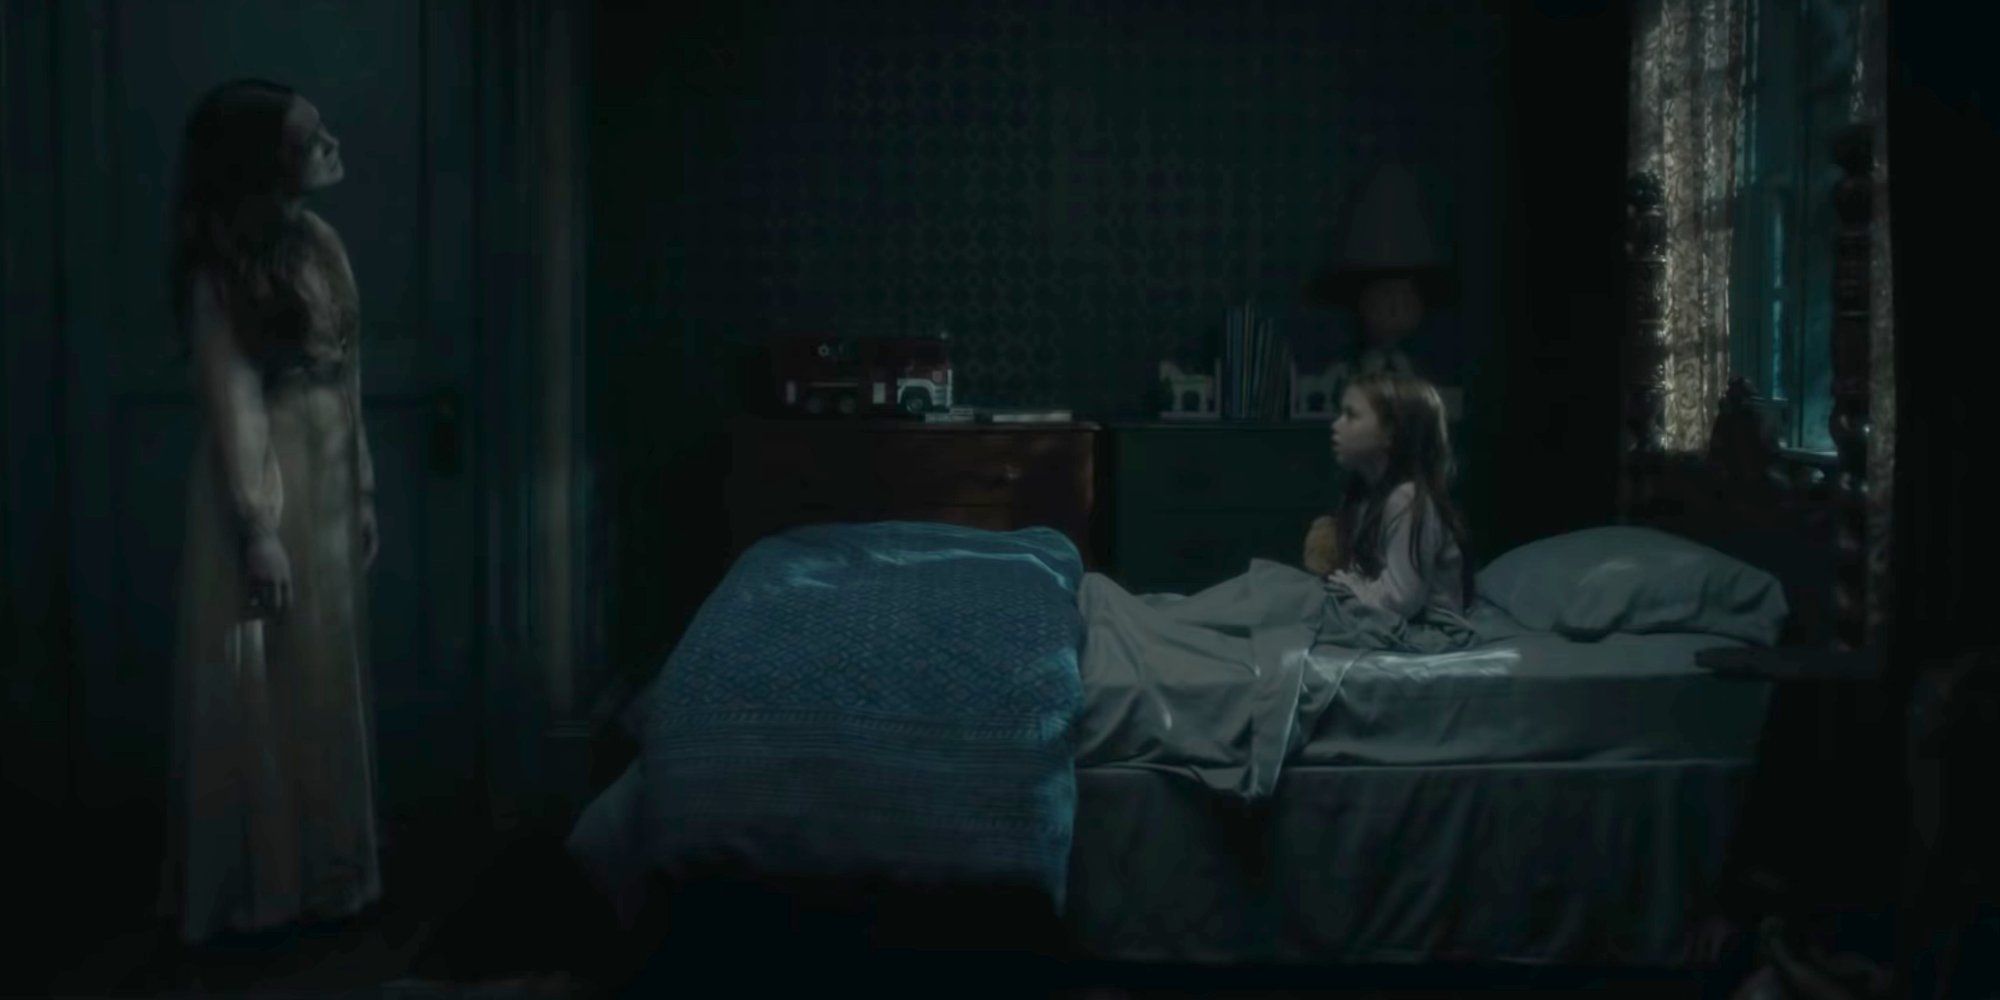 The Bent Neck Lady visits young Nell Crain in her bedroom in The Haunting of Hill House